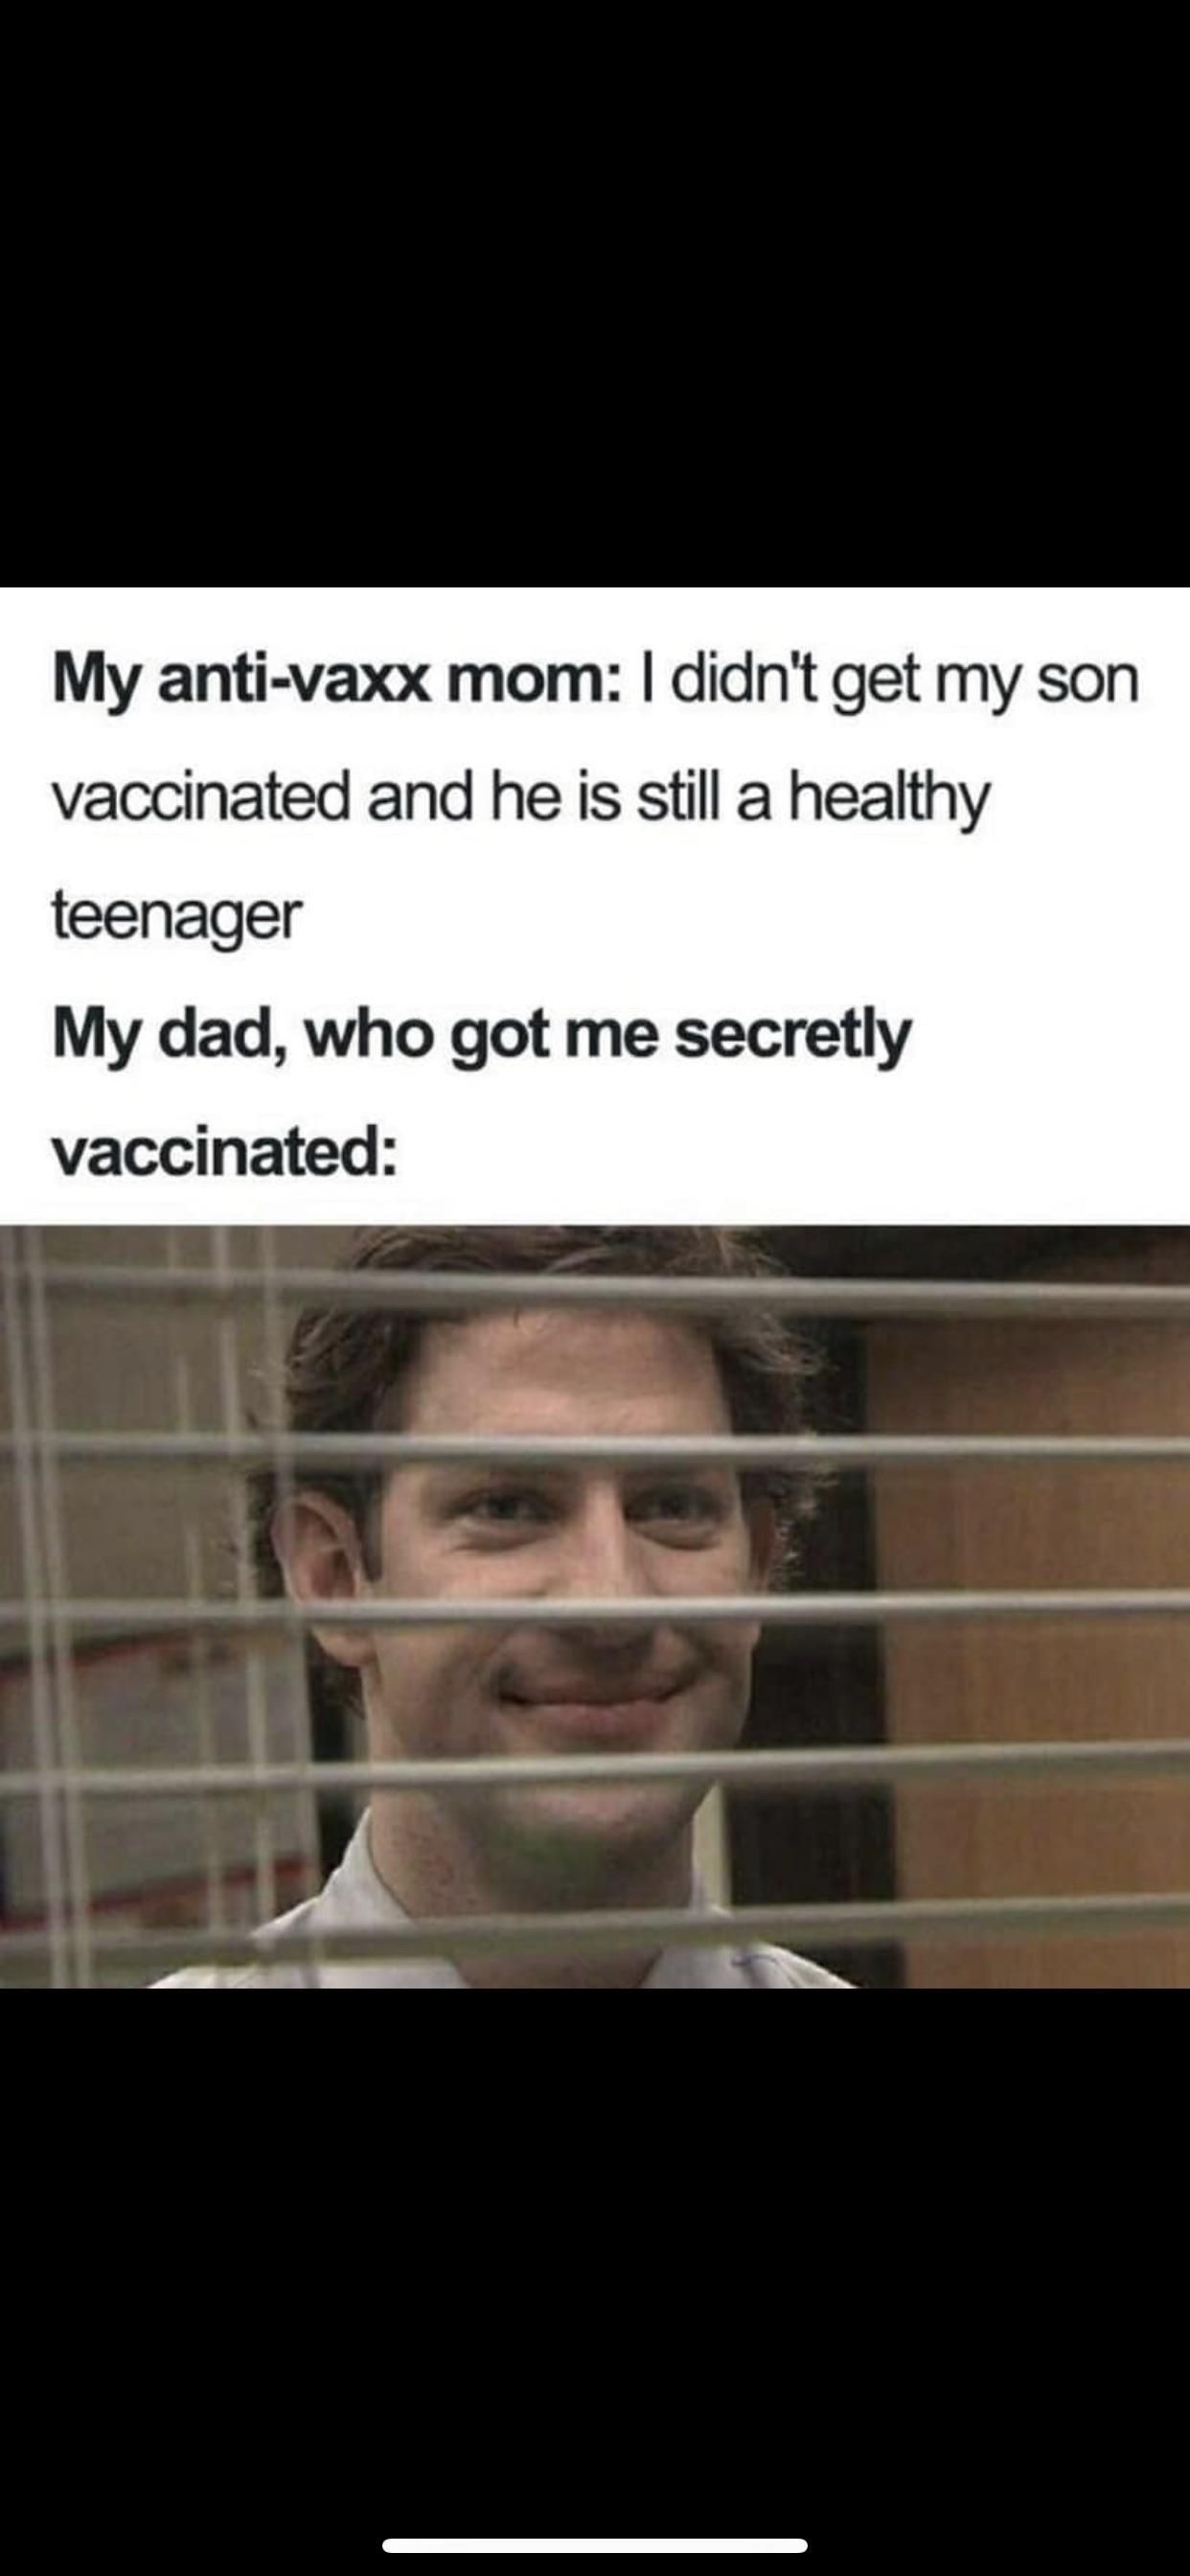 Mom trying to make a case against vaccines